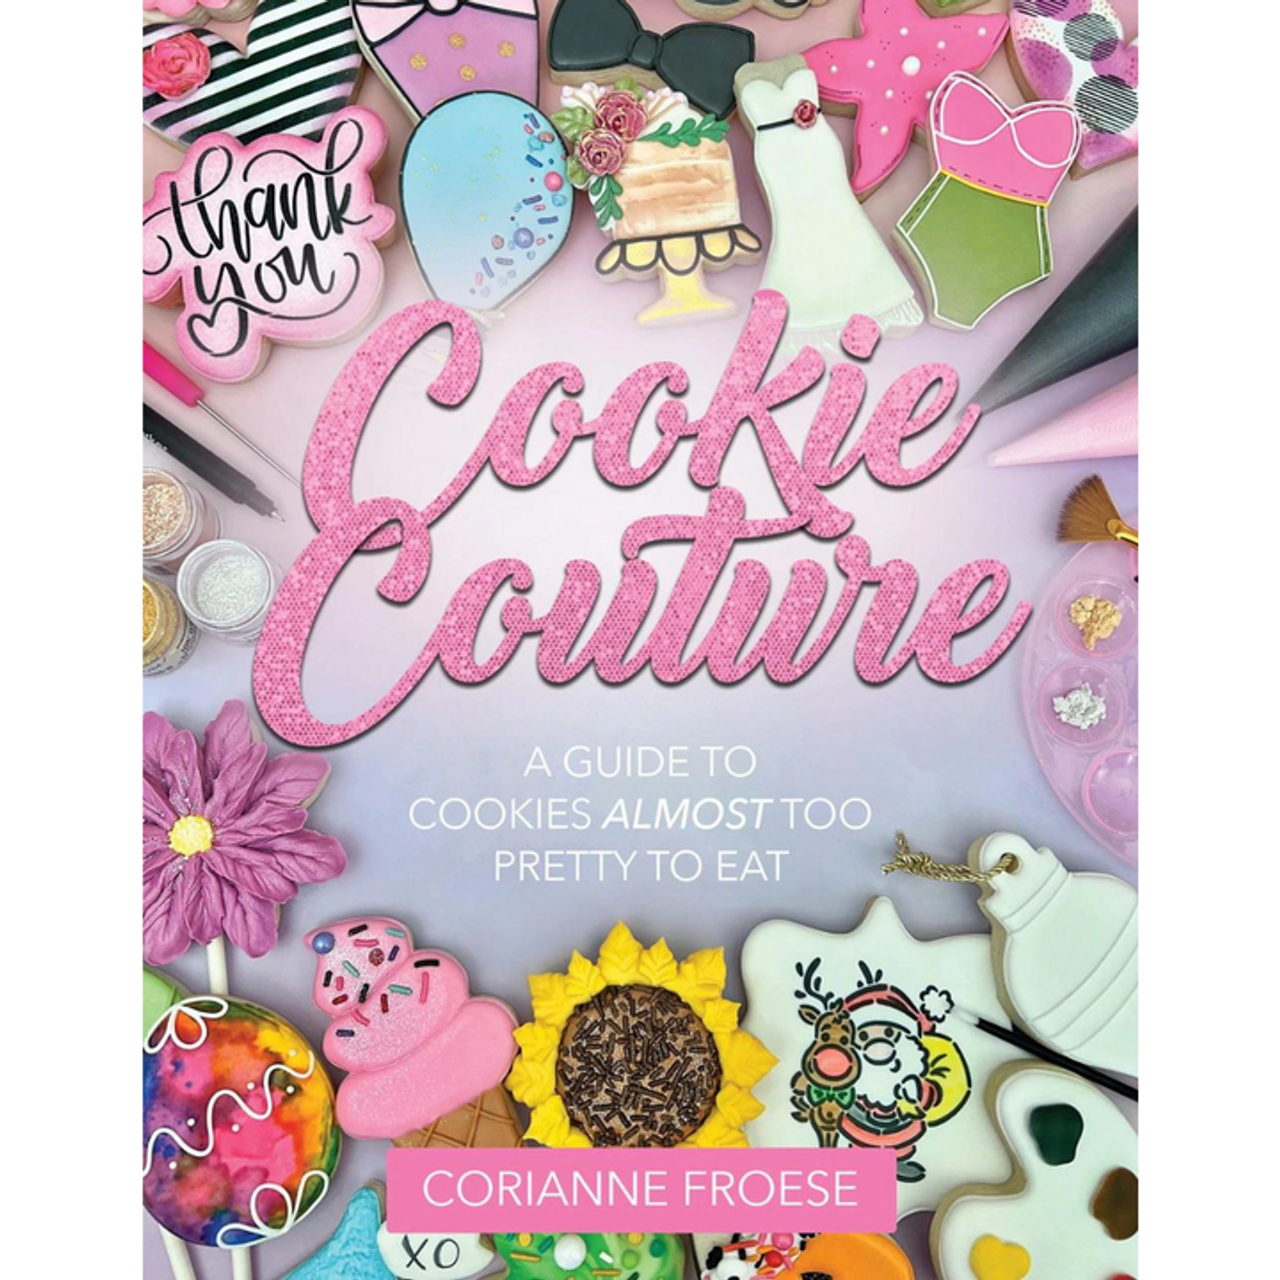 Cookie Couture: A Guide to Cookies Almost too Pretty to Eat (Paperback)*